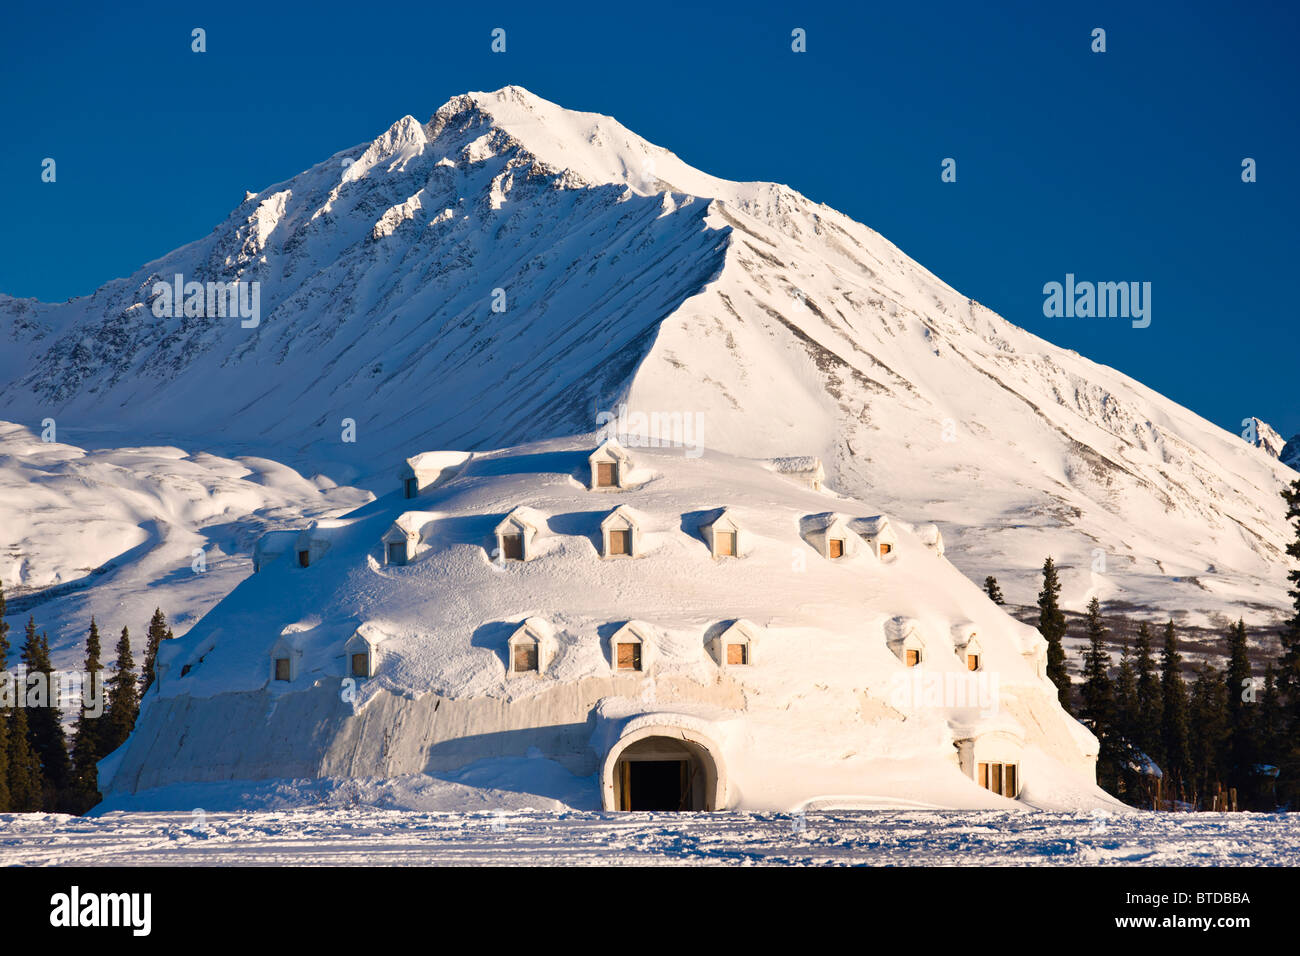 Winter view of Igloo City, a uniquely Alaskan architectural icon located along the George Parks Highway near Broad Pass, Alaska Stock Photo